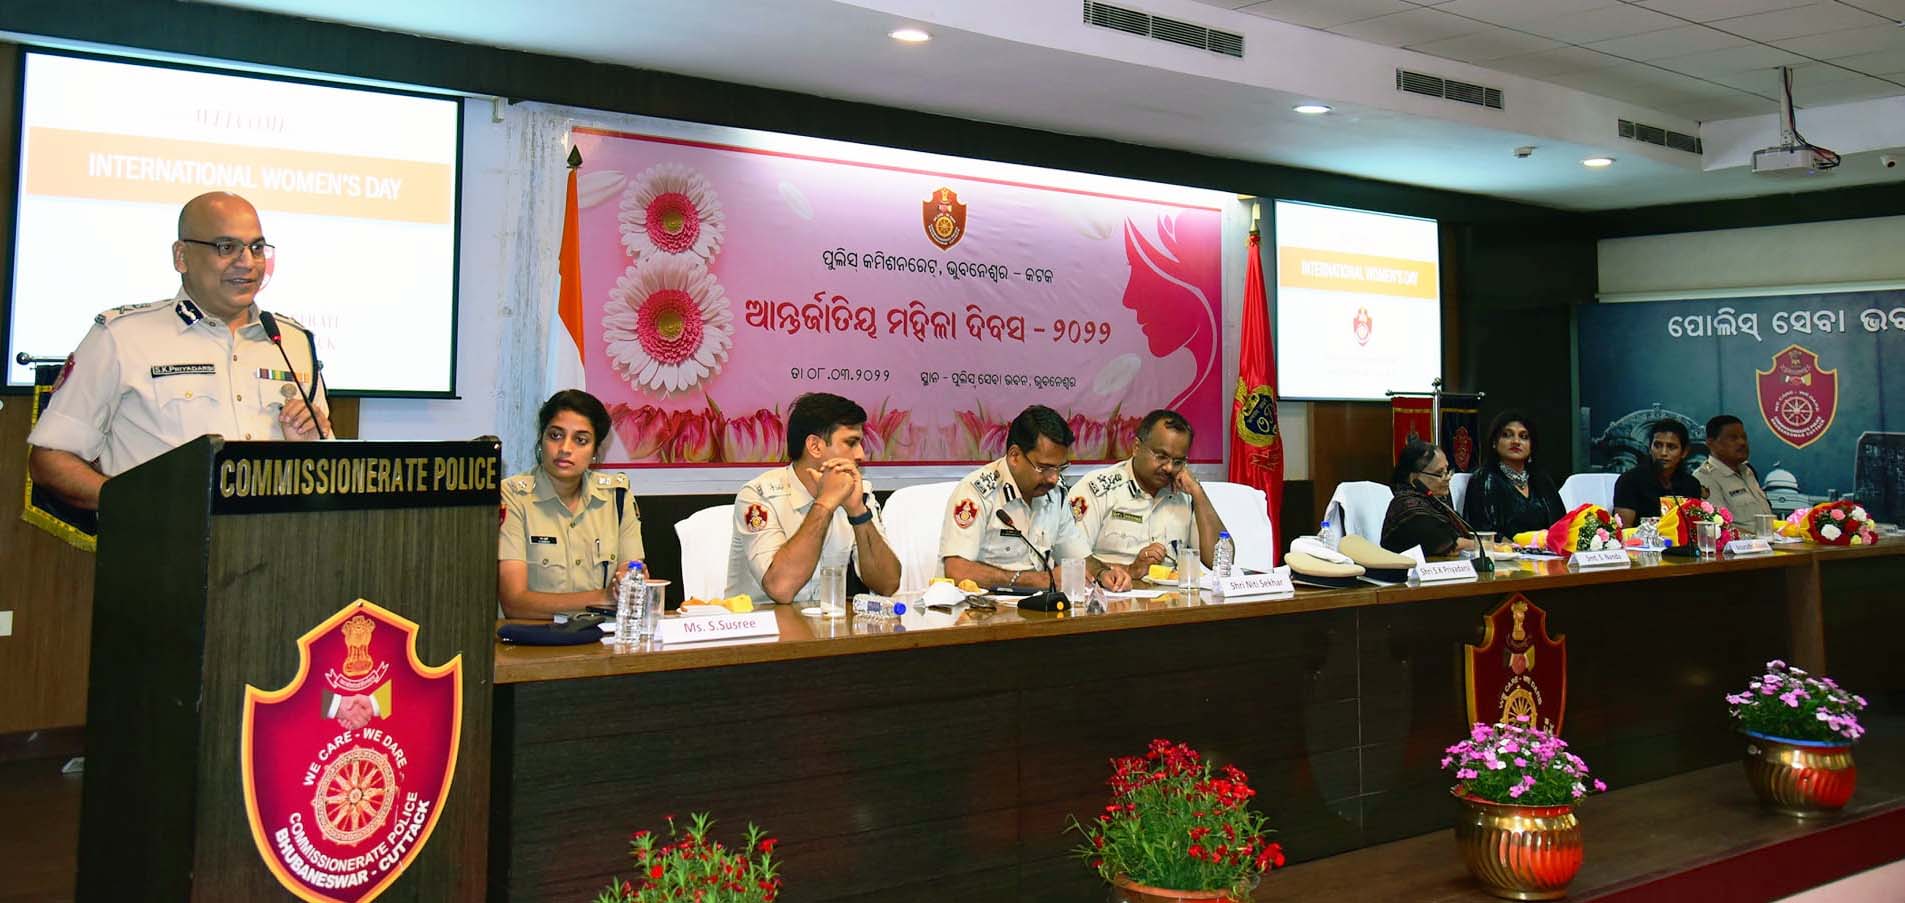 The Special Police Officers (SPOs) of College of Engineering Bhubaneswar (COEB) joined International Women�s Day celebration at Commissionerate Police Bhubaneswar-Cuttack on 8th March 2022. The meeting was held under the chairmanship of CP Sri S.K. Priyadarsi, IPS, in which Smt. Sukamini Nanda, eminent Writer, Smt. Anuradha Biswal, eminent athlete, Ms Shradhanjali Samantray, former Captain of Indian Women football team attended the function as distinguished guests on this auspicious occasion.